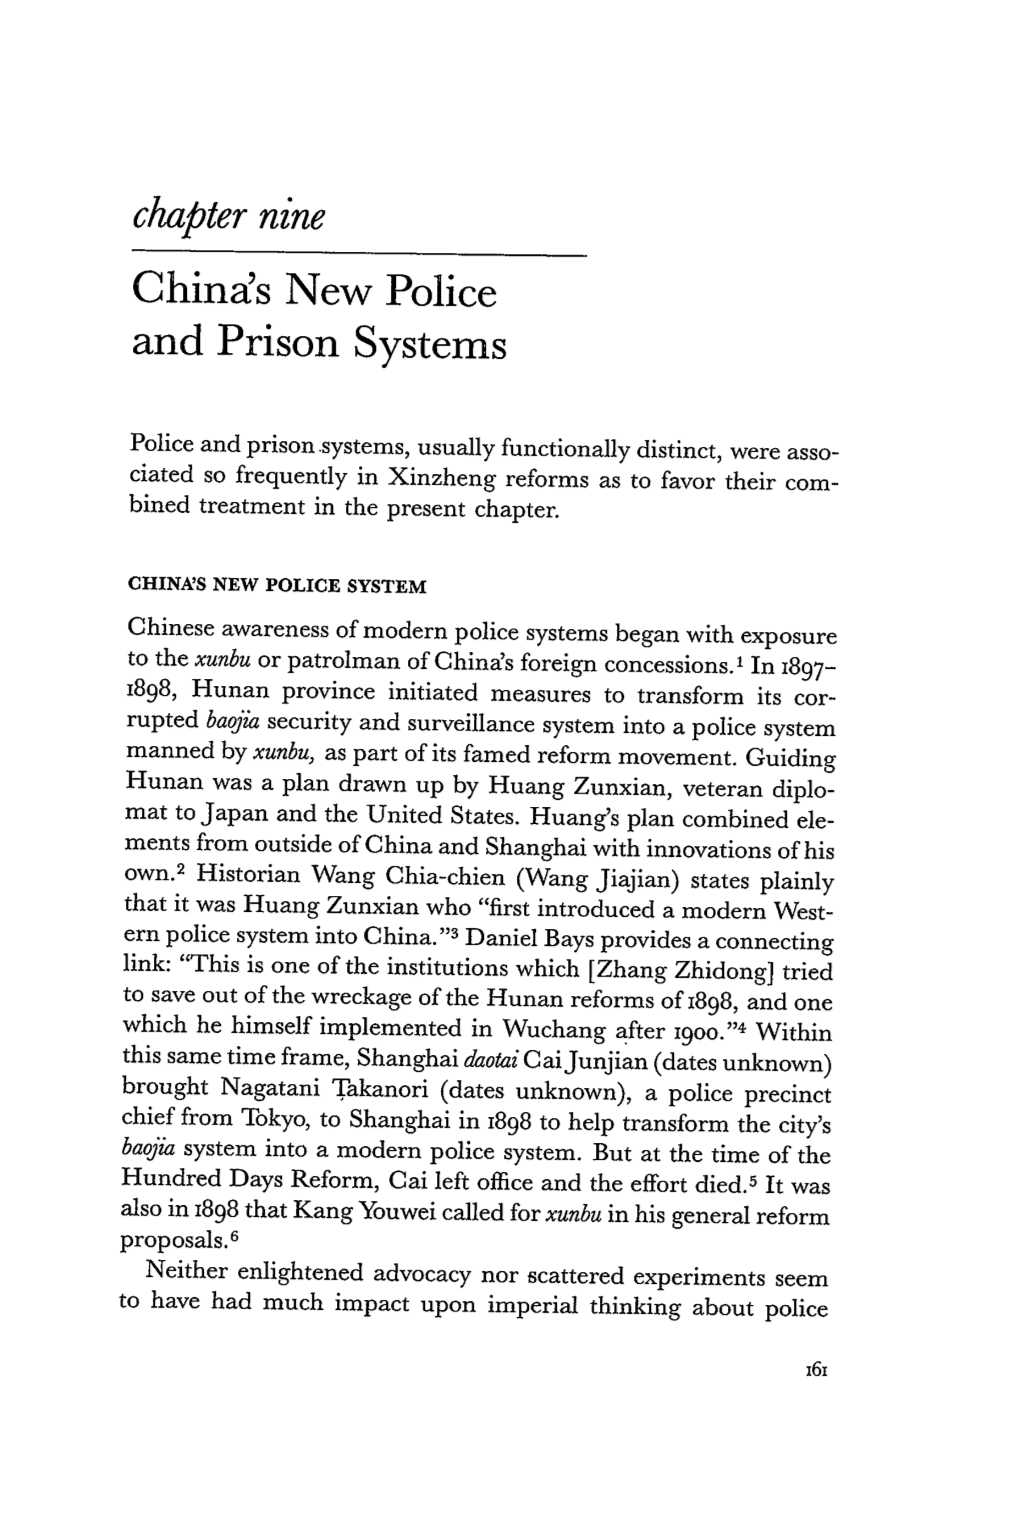 China's New Police and Prison Systems